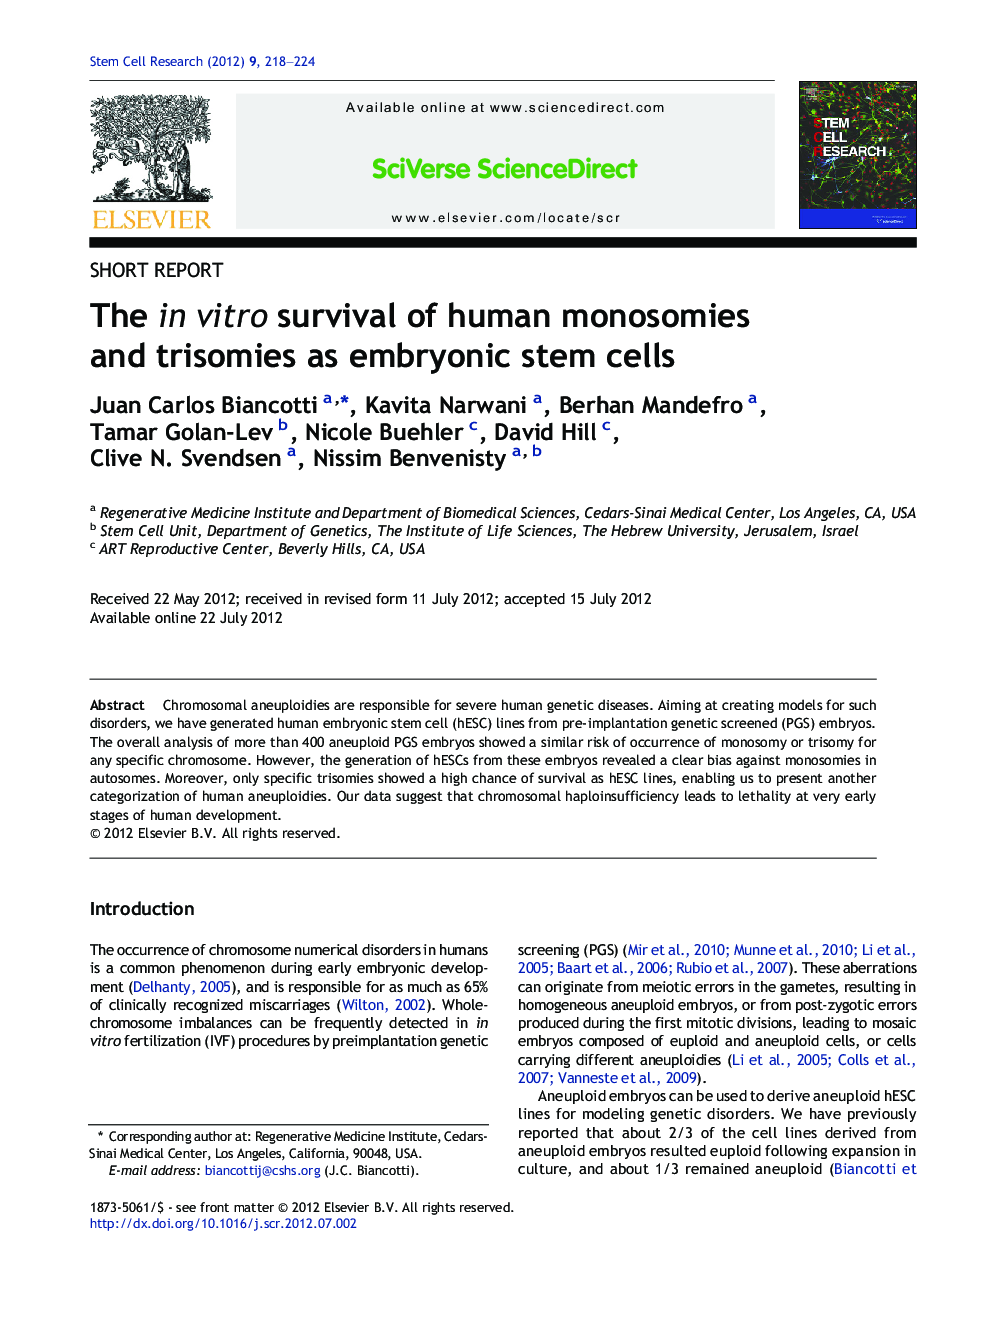 The in vitro survival of human monosomies and trisomies as embryonic stem cells